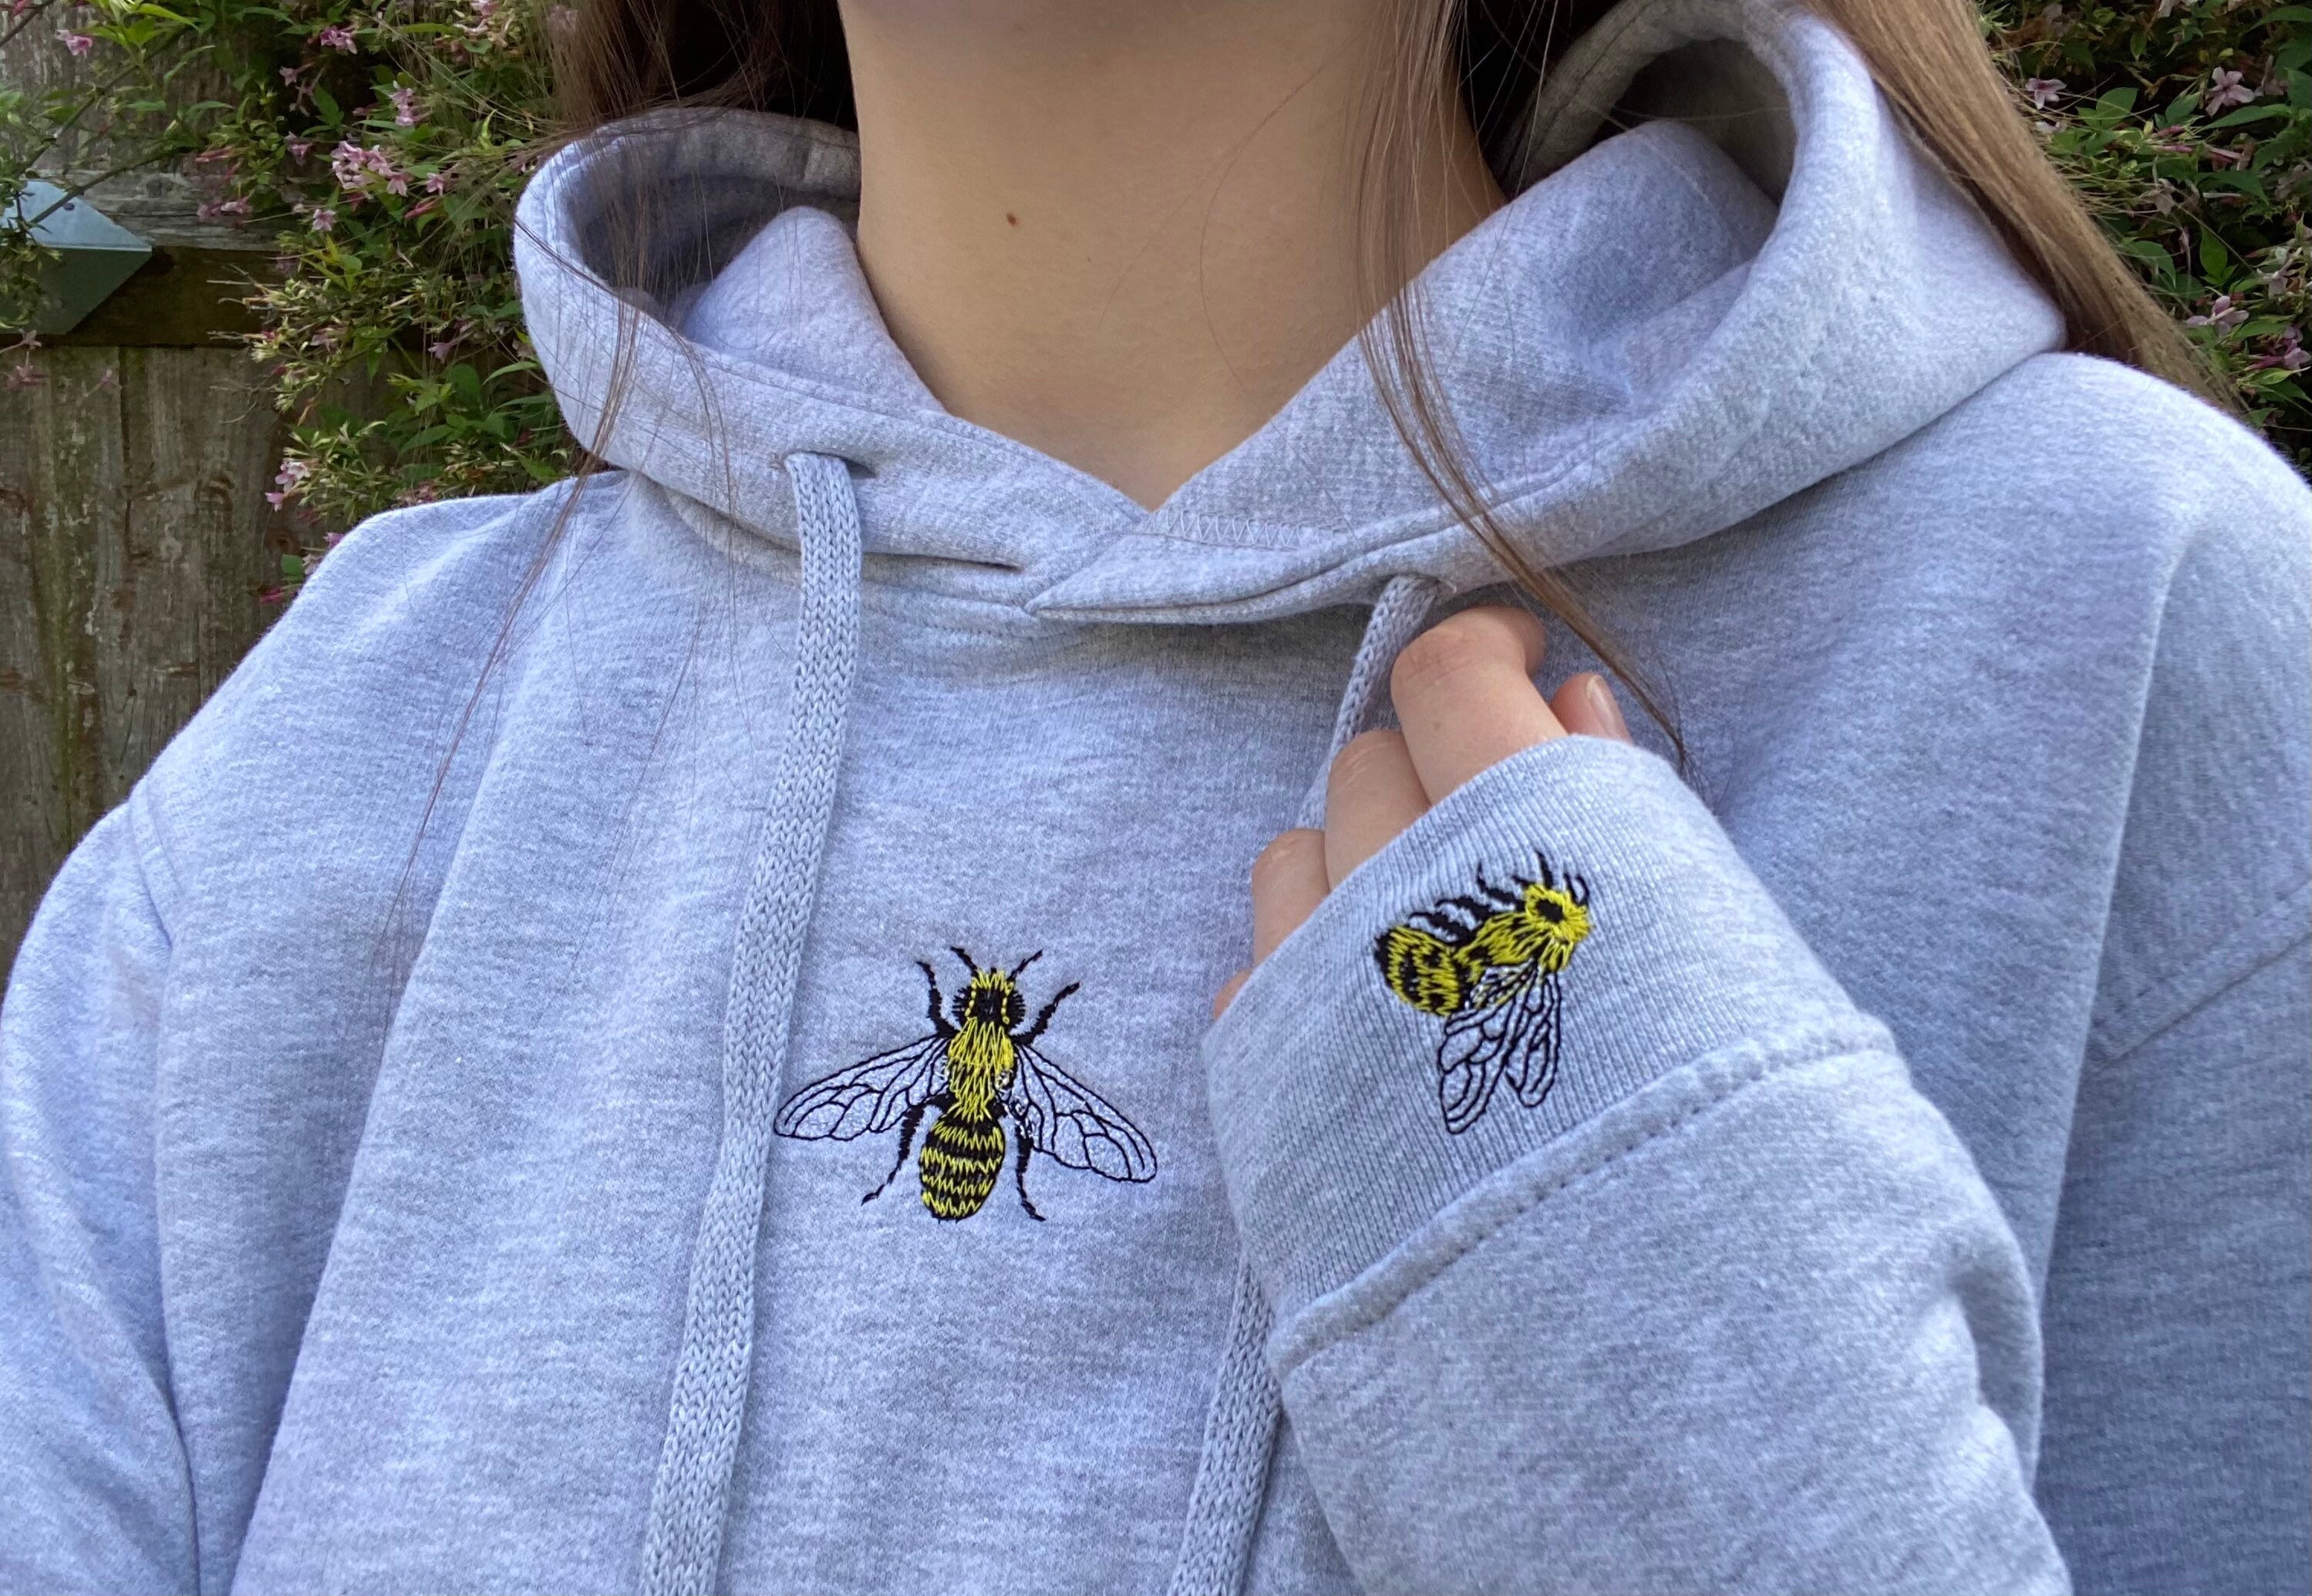 Embroidered Bee Hoodie, Bumble Bee, Honey Honey, For Him, Her, Christmas, Oversized, Gift, Present, Cotton, Vegan